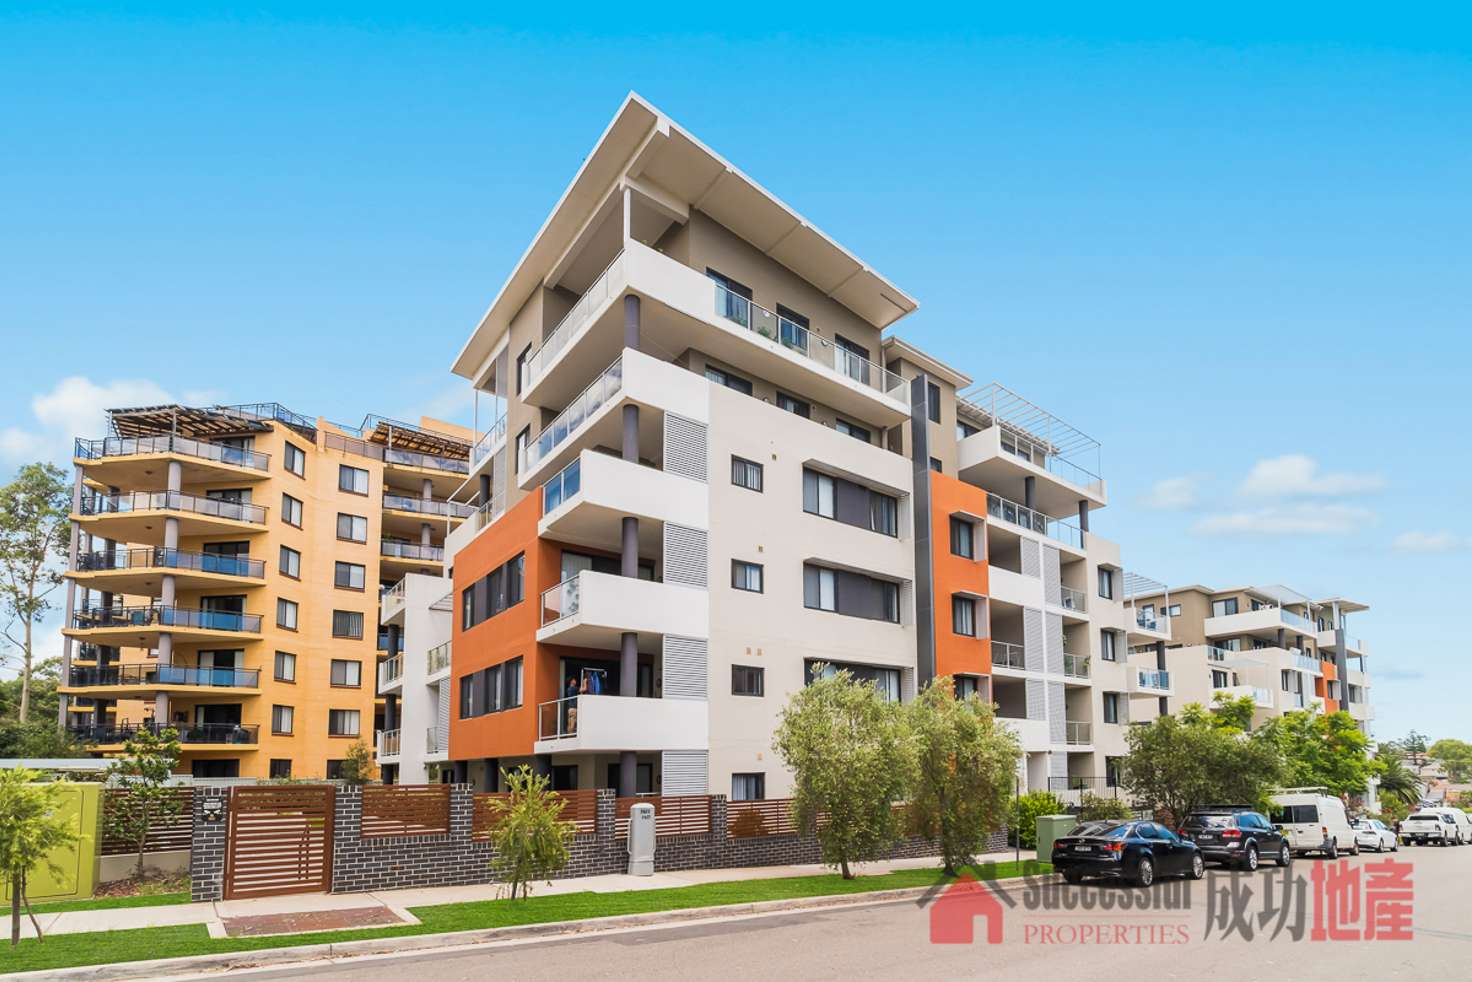 Main view of Homely apartment listing, 304/2-4 Amos Street, Parramatta NSW 2150